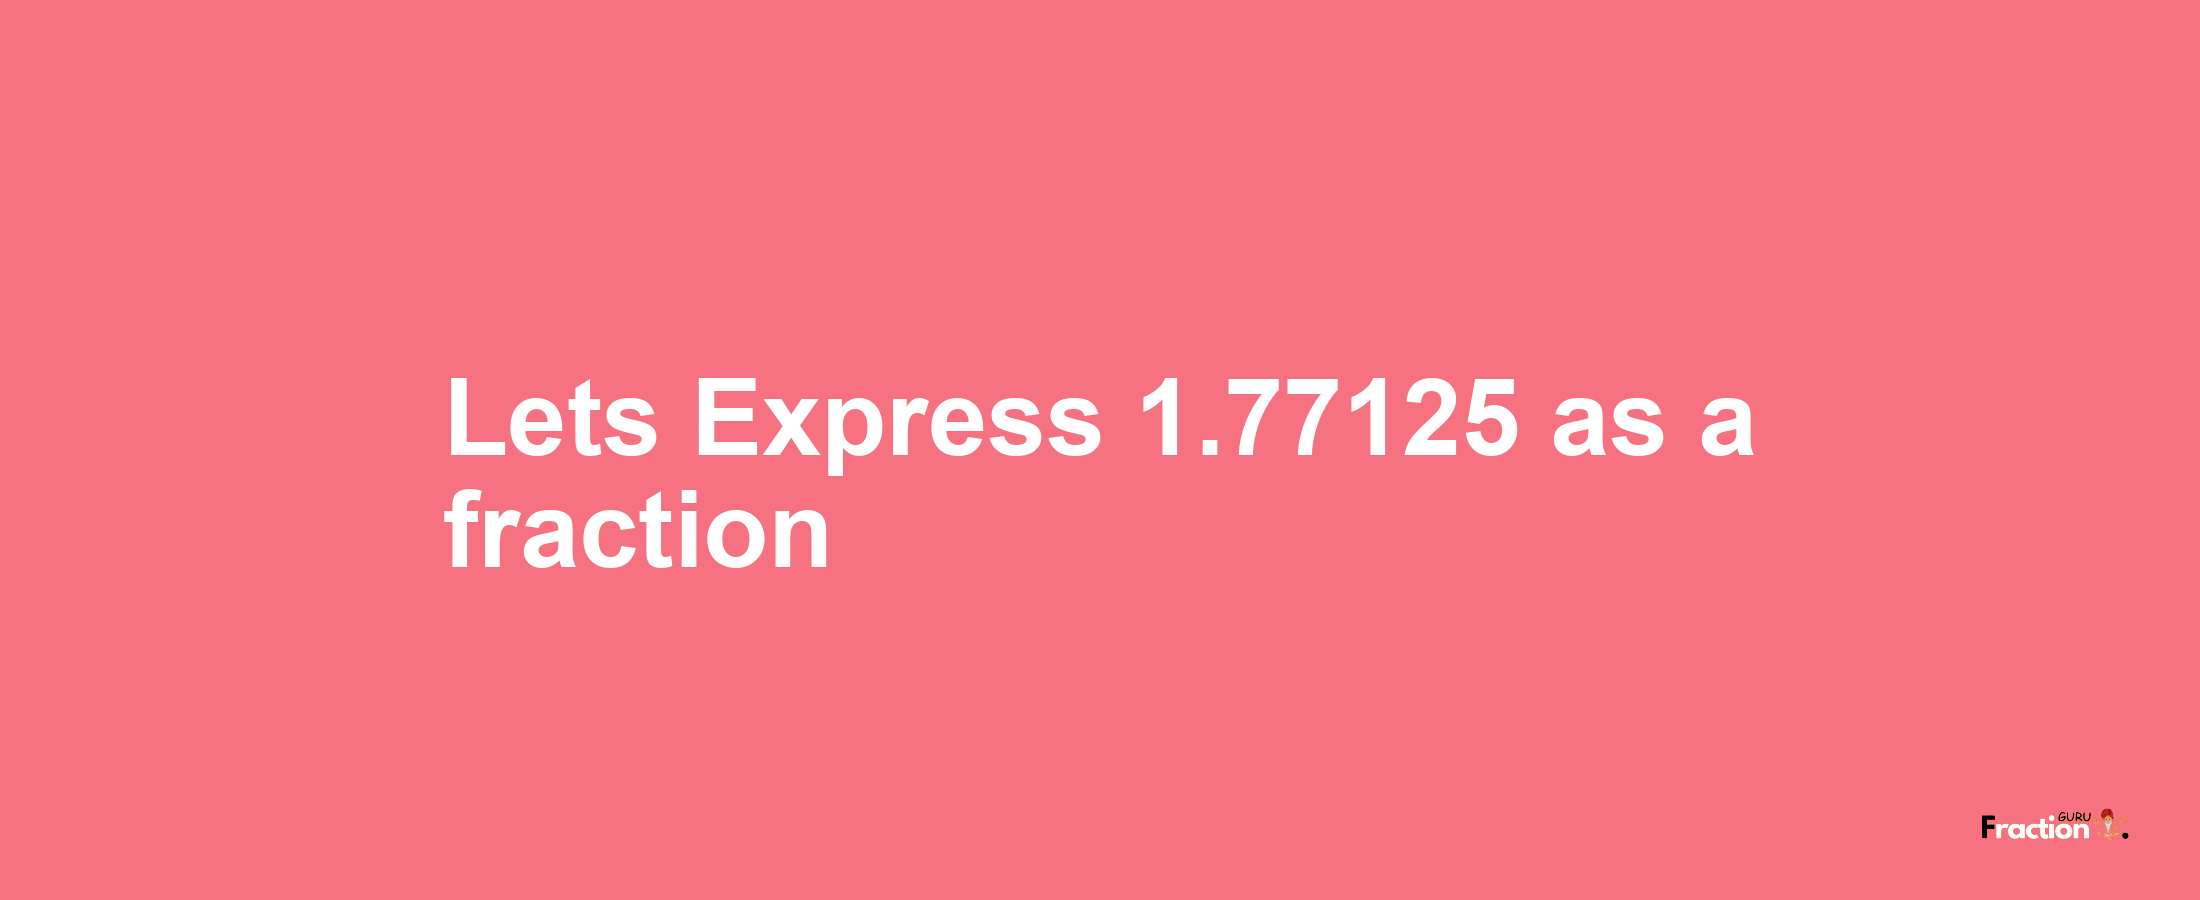 Lets Express 1.77125 as afraction